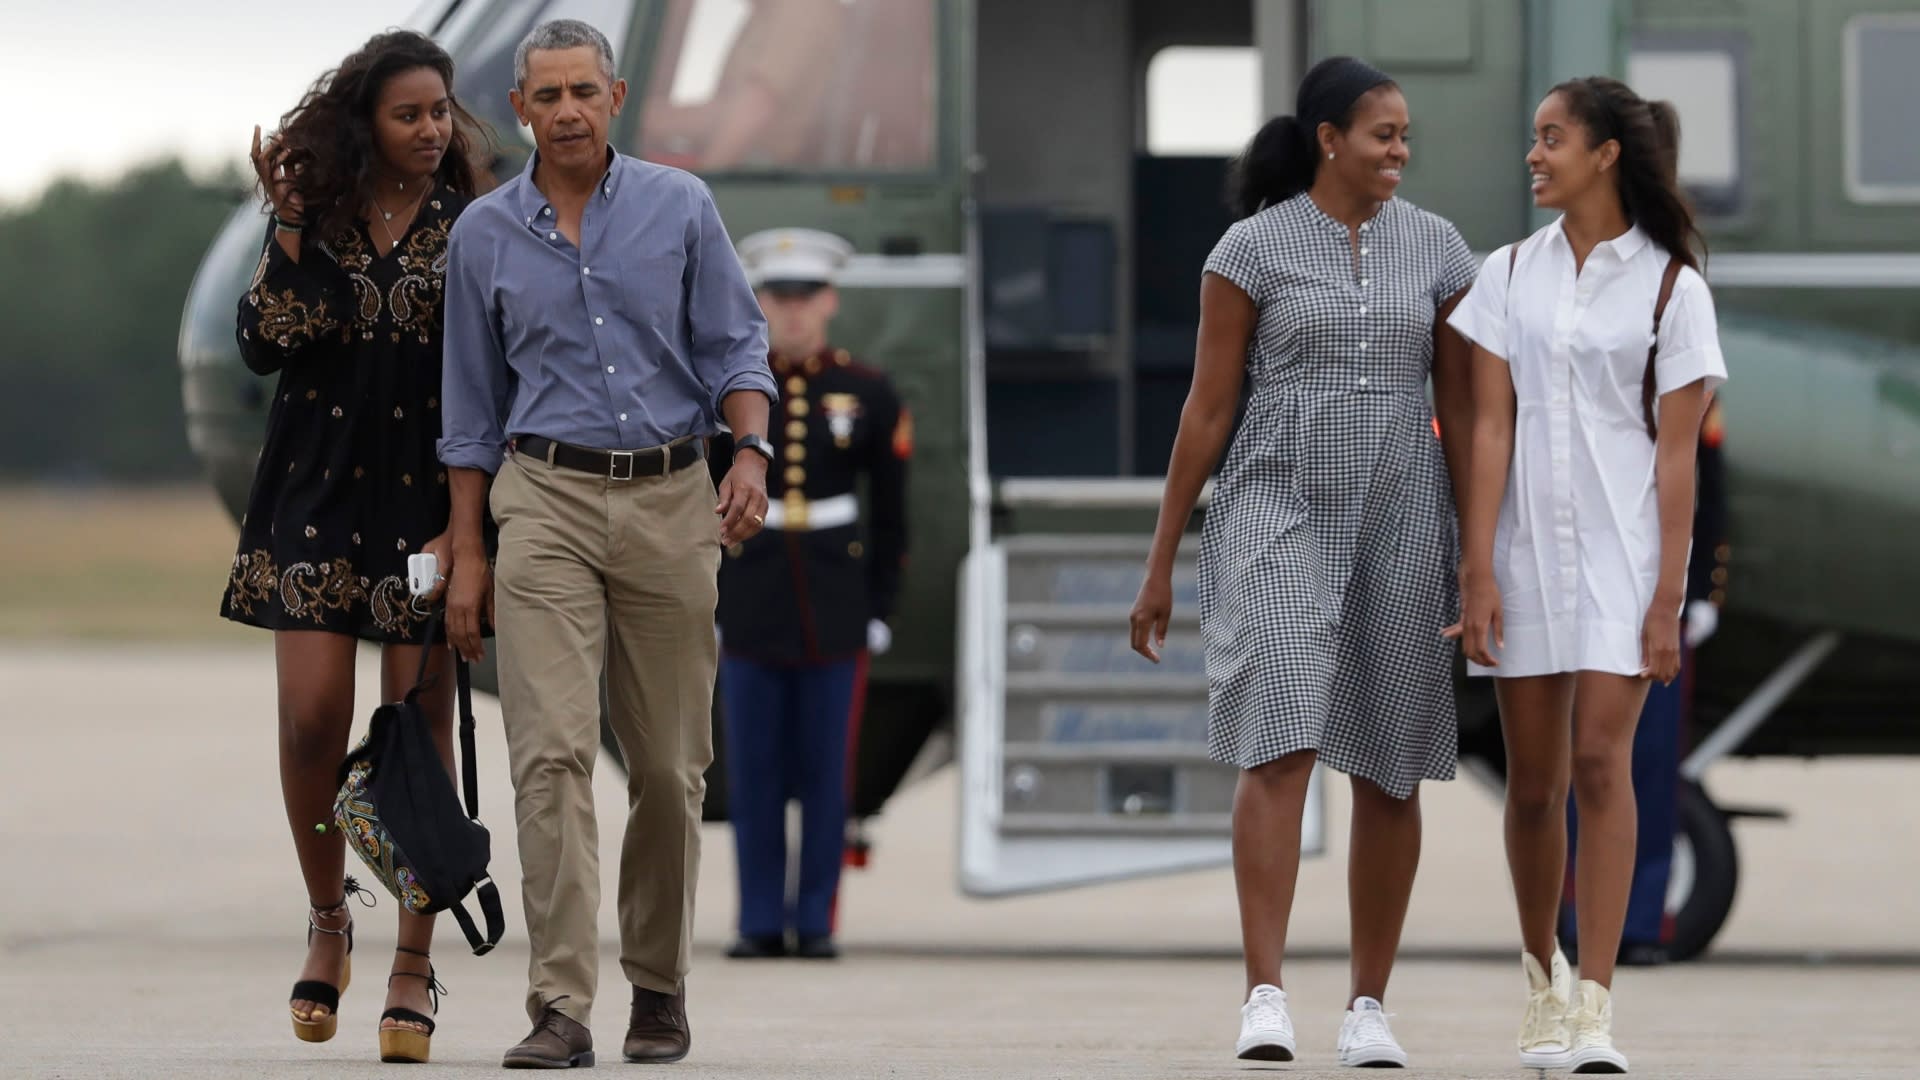 7 Conspiracy Theories About Malia & Sasha Obama That Are So Absurd You Have  to Laugh